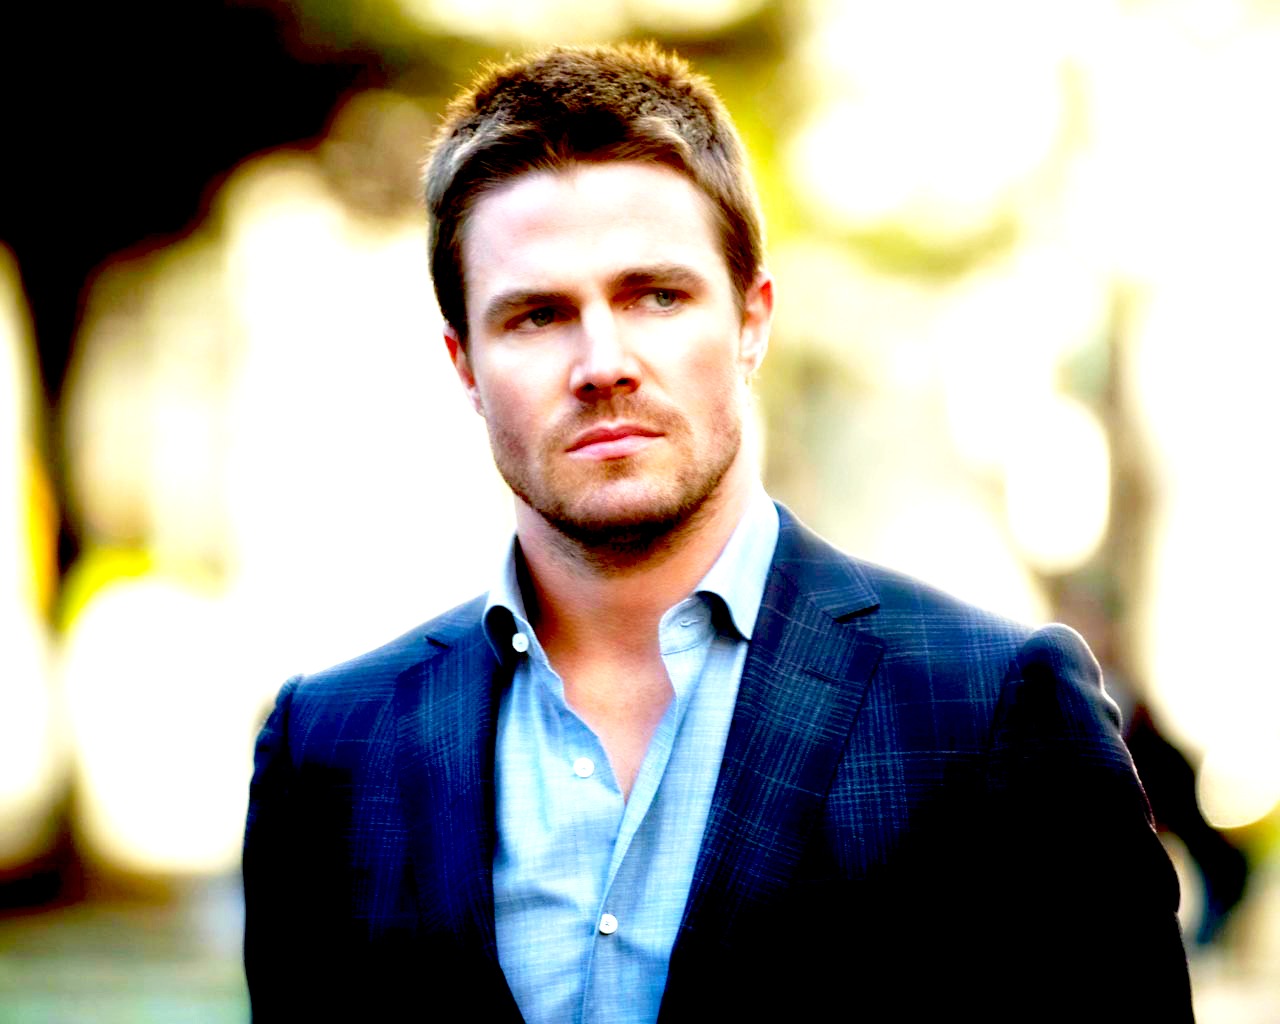 oliver queen wallpaper,forehead,suit,chin,white collar worker,cool